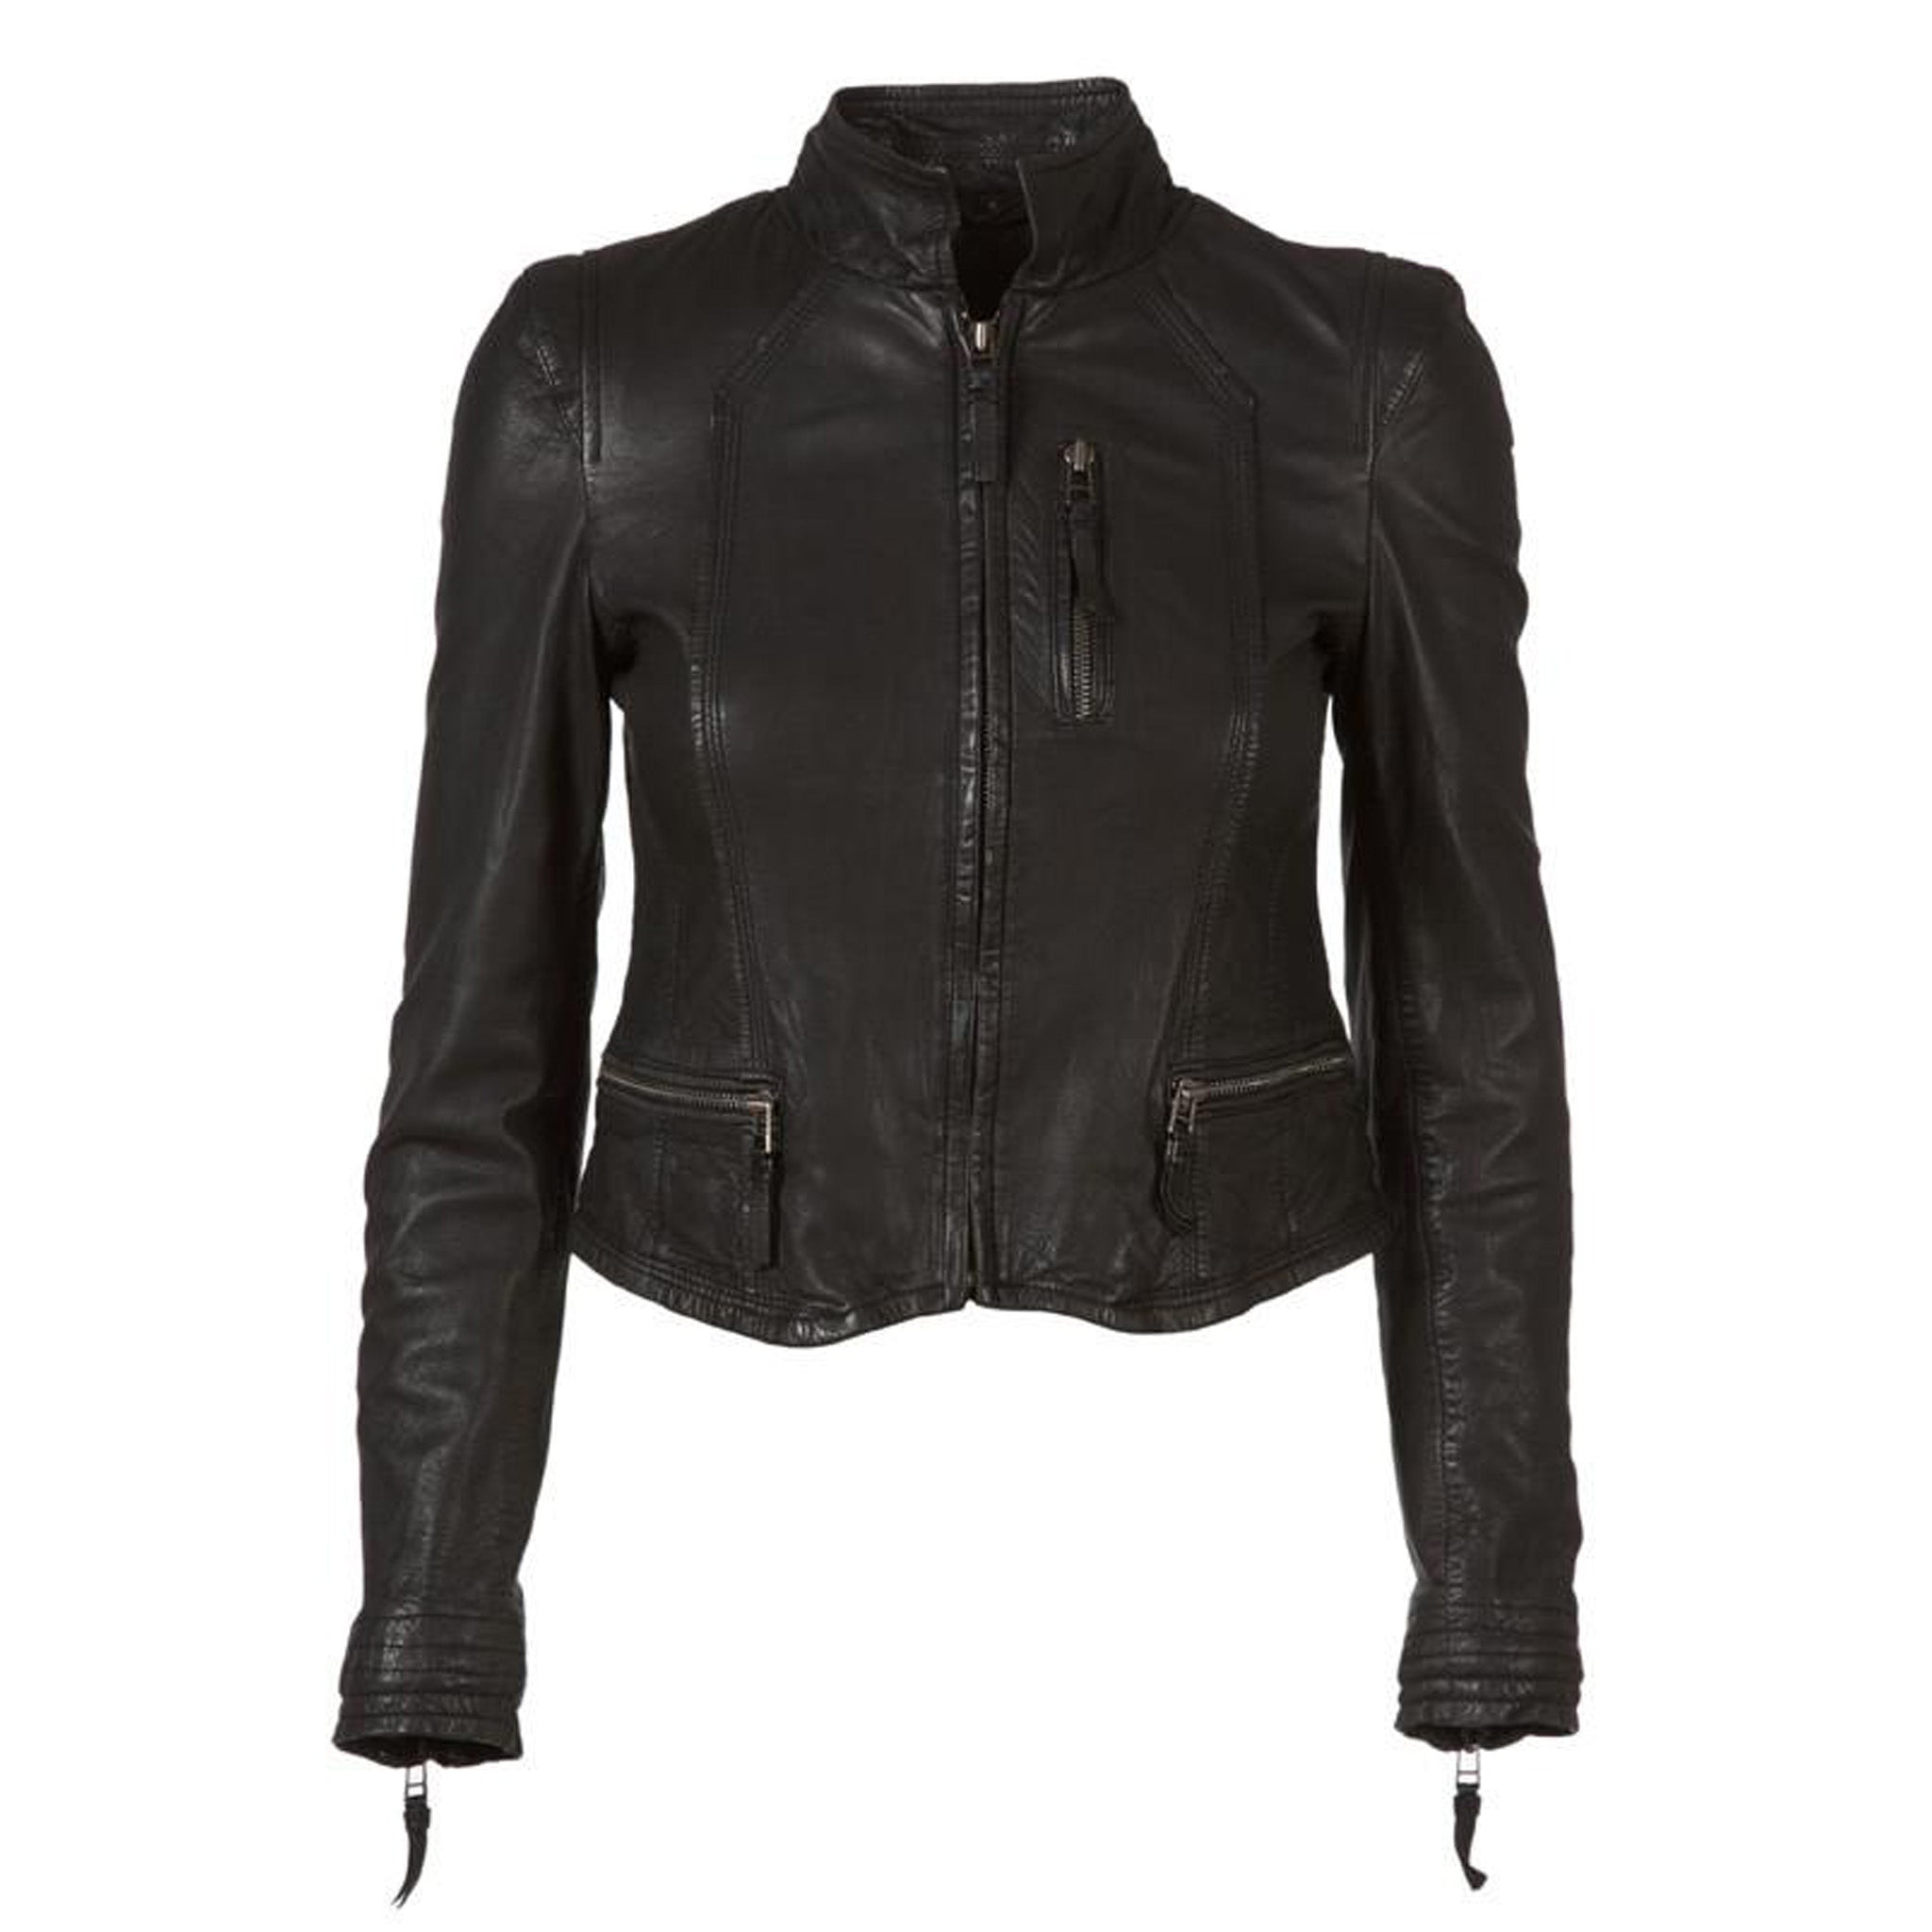 A women's fitted, MDK black Leather Rucy Jacket.